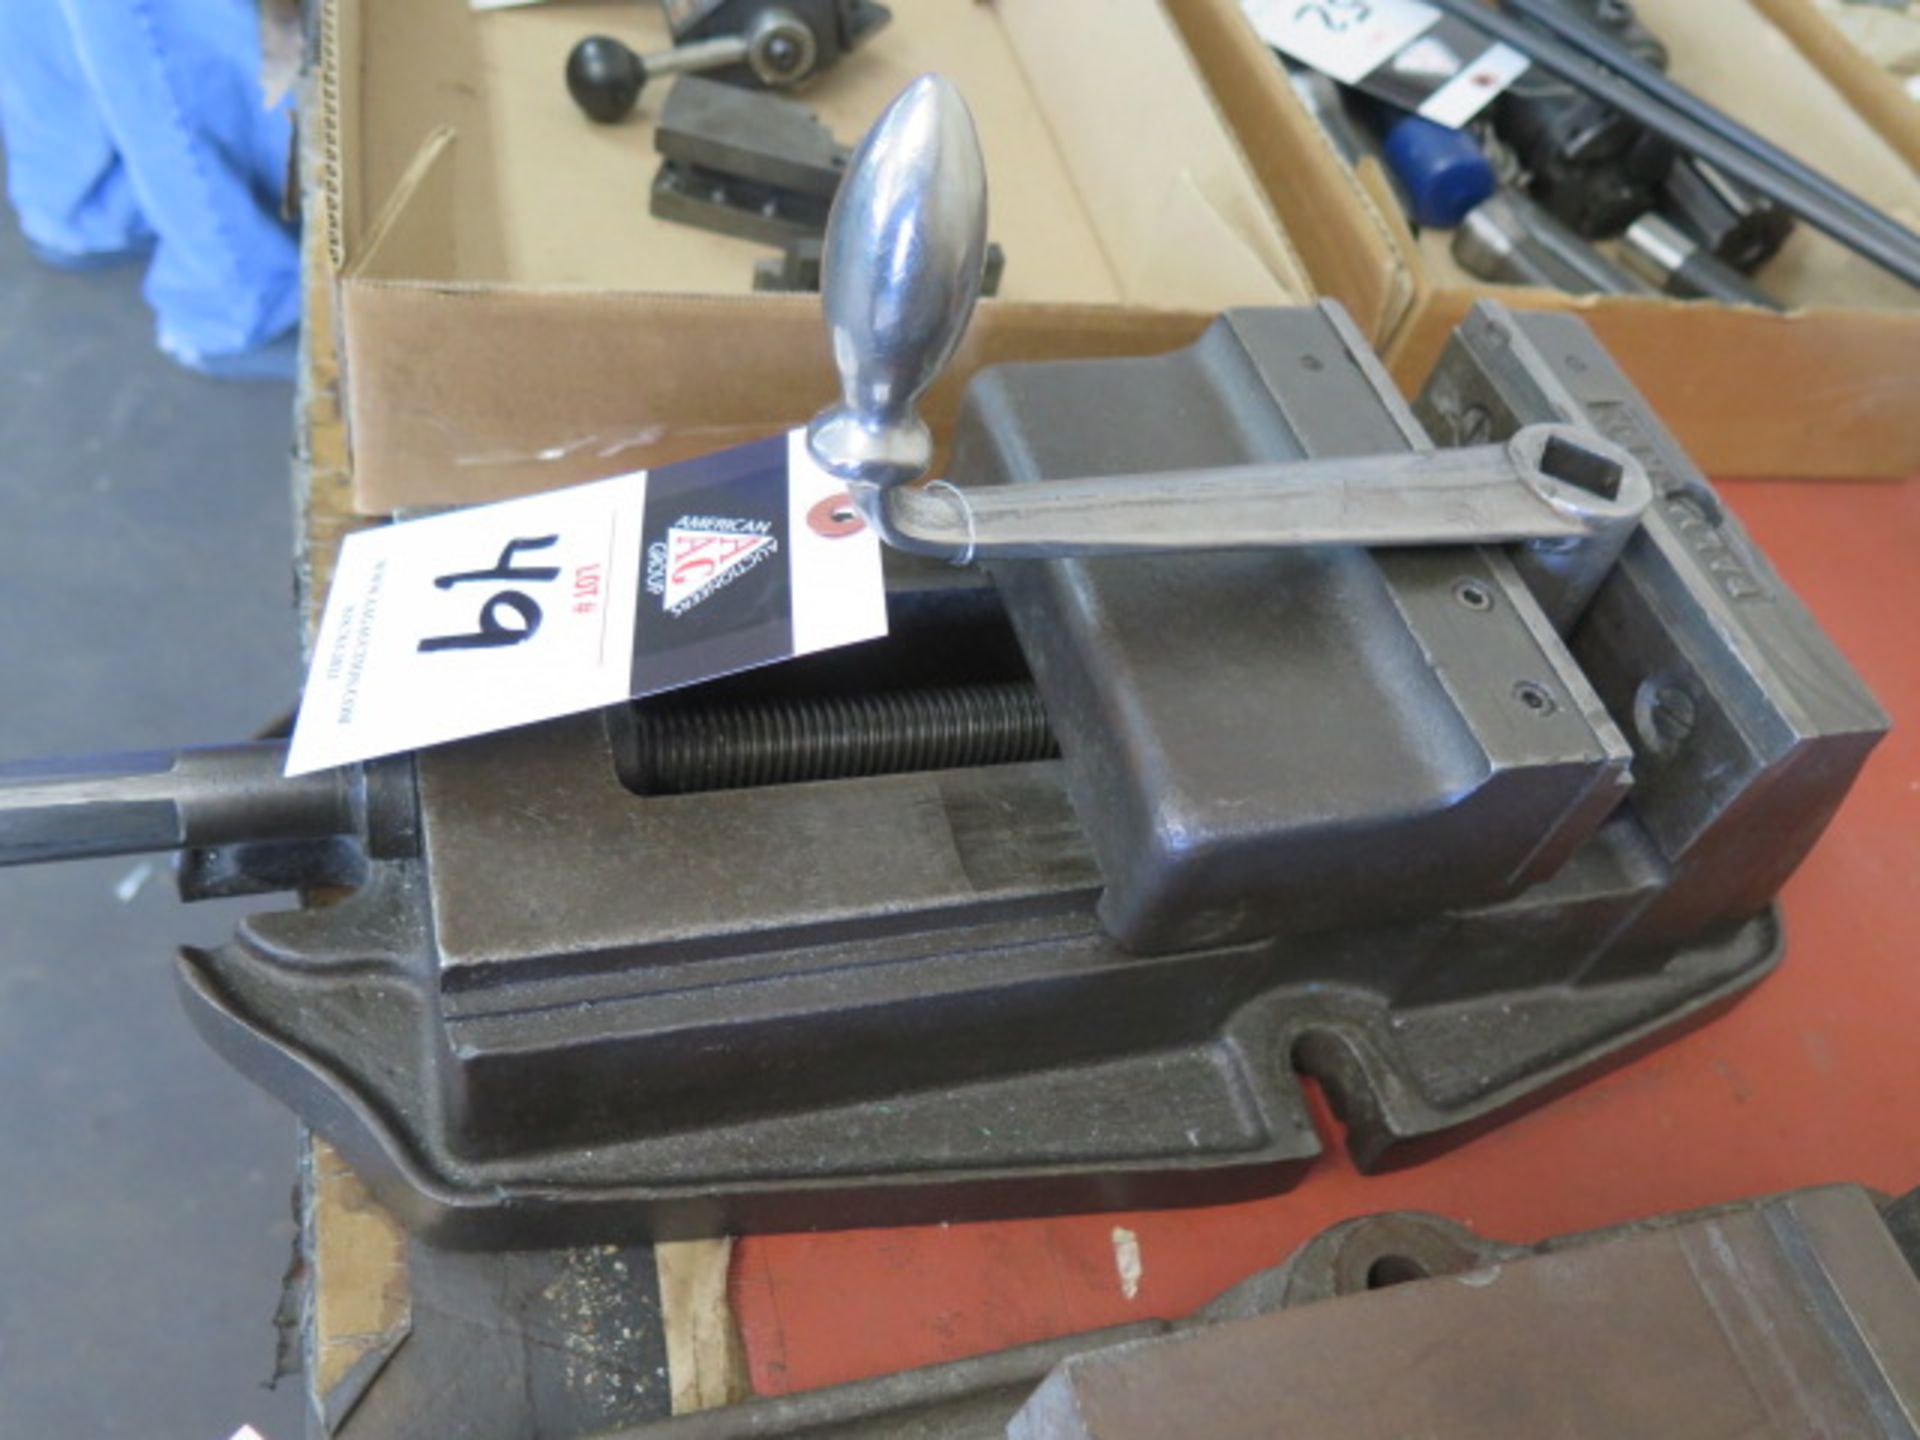 Palmgren 6" Machine Vise (SOLD AS-IS - NO WARRANTY) - Image 2 of 4